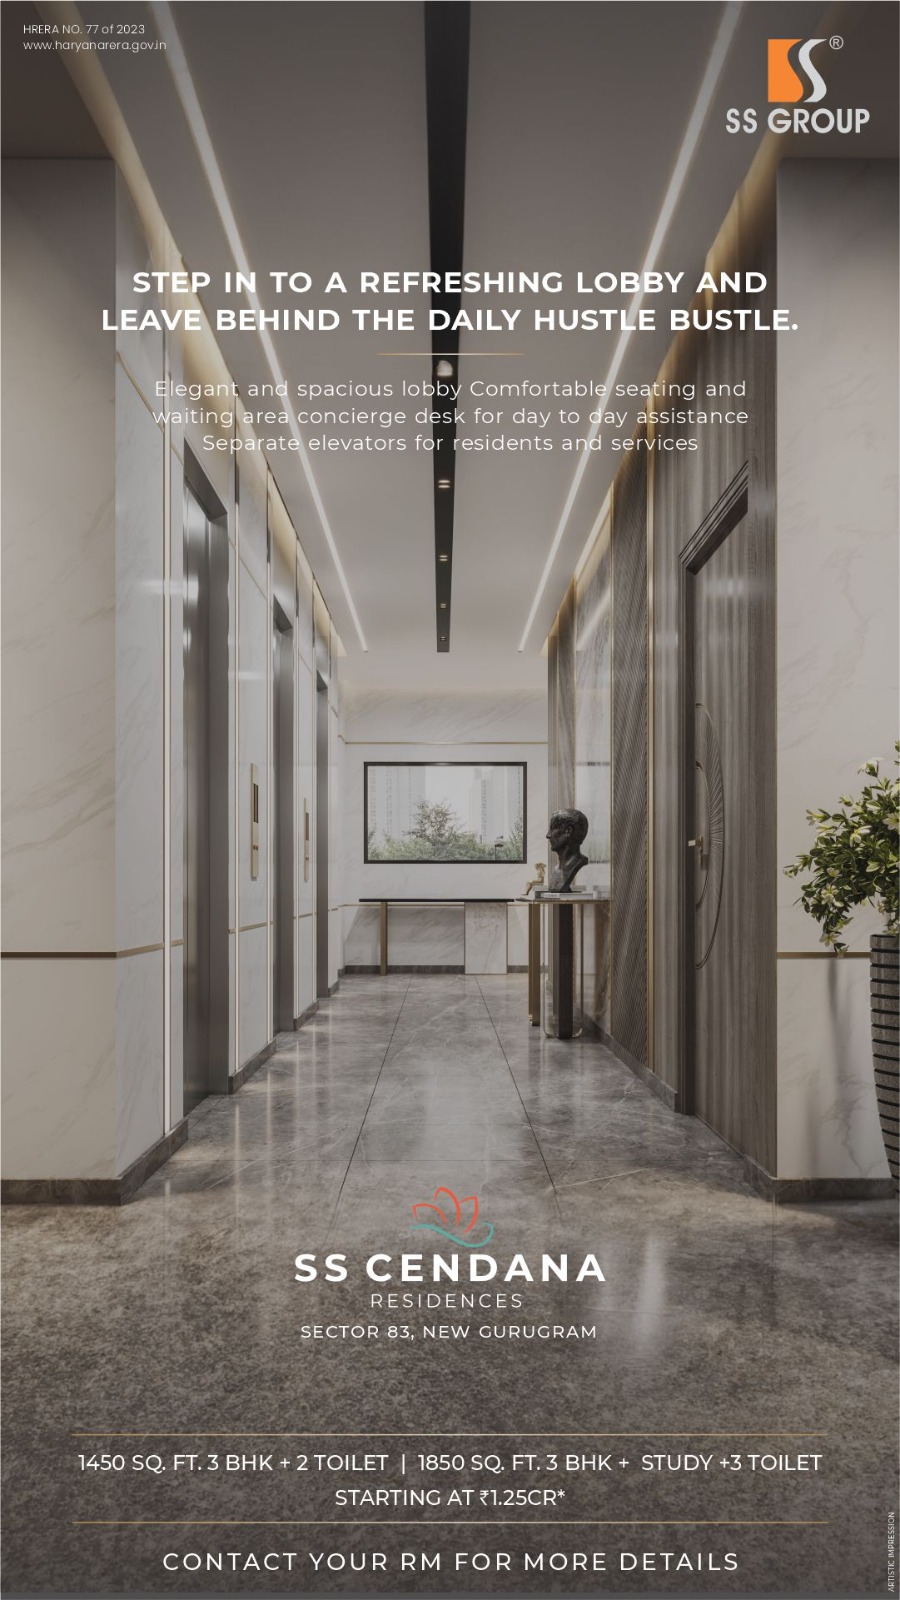 Step in to a refreshing lobby and leave behind the daily hustle bustle at SS Cendana Residence in Sector 83, Gurgaon Update